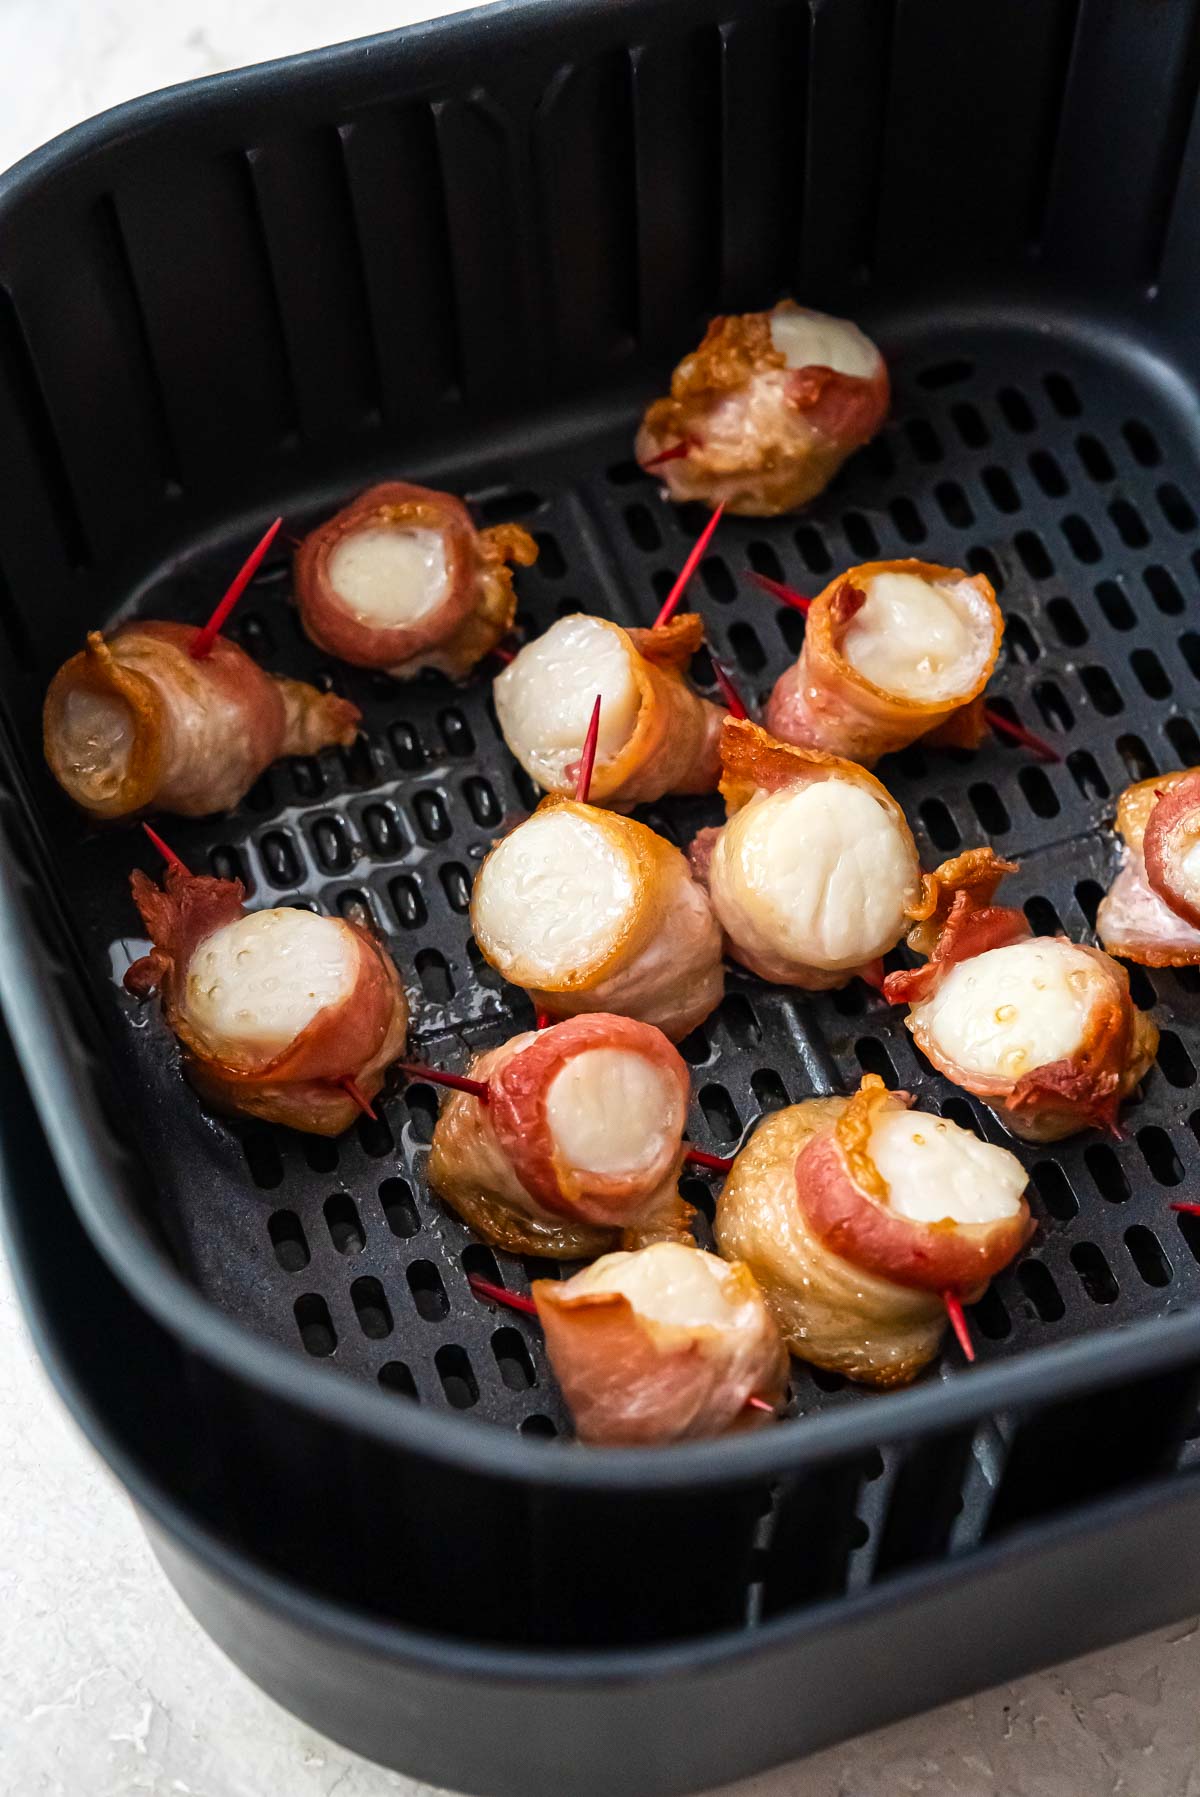 the finished bacon wrapped scallops in air fryer basket